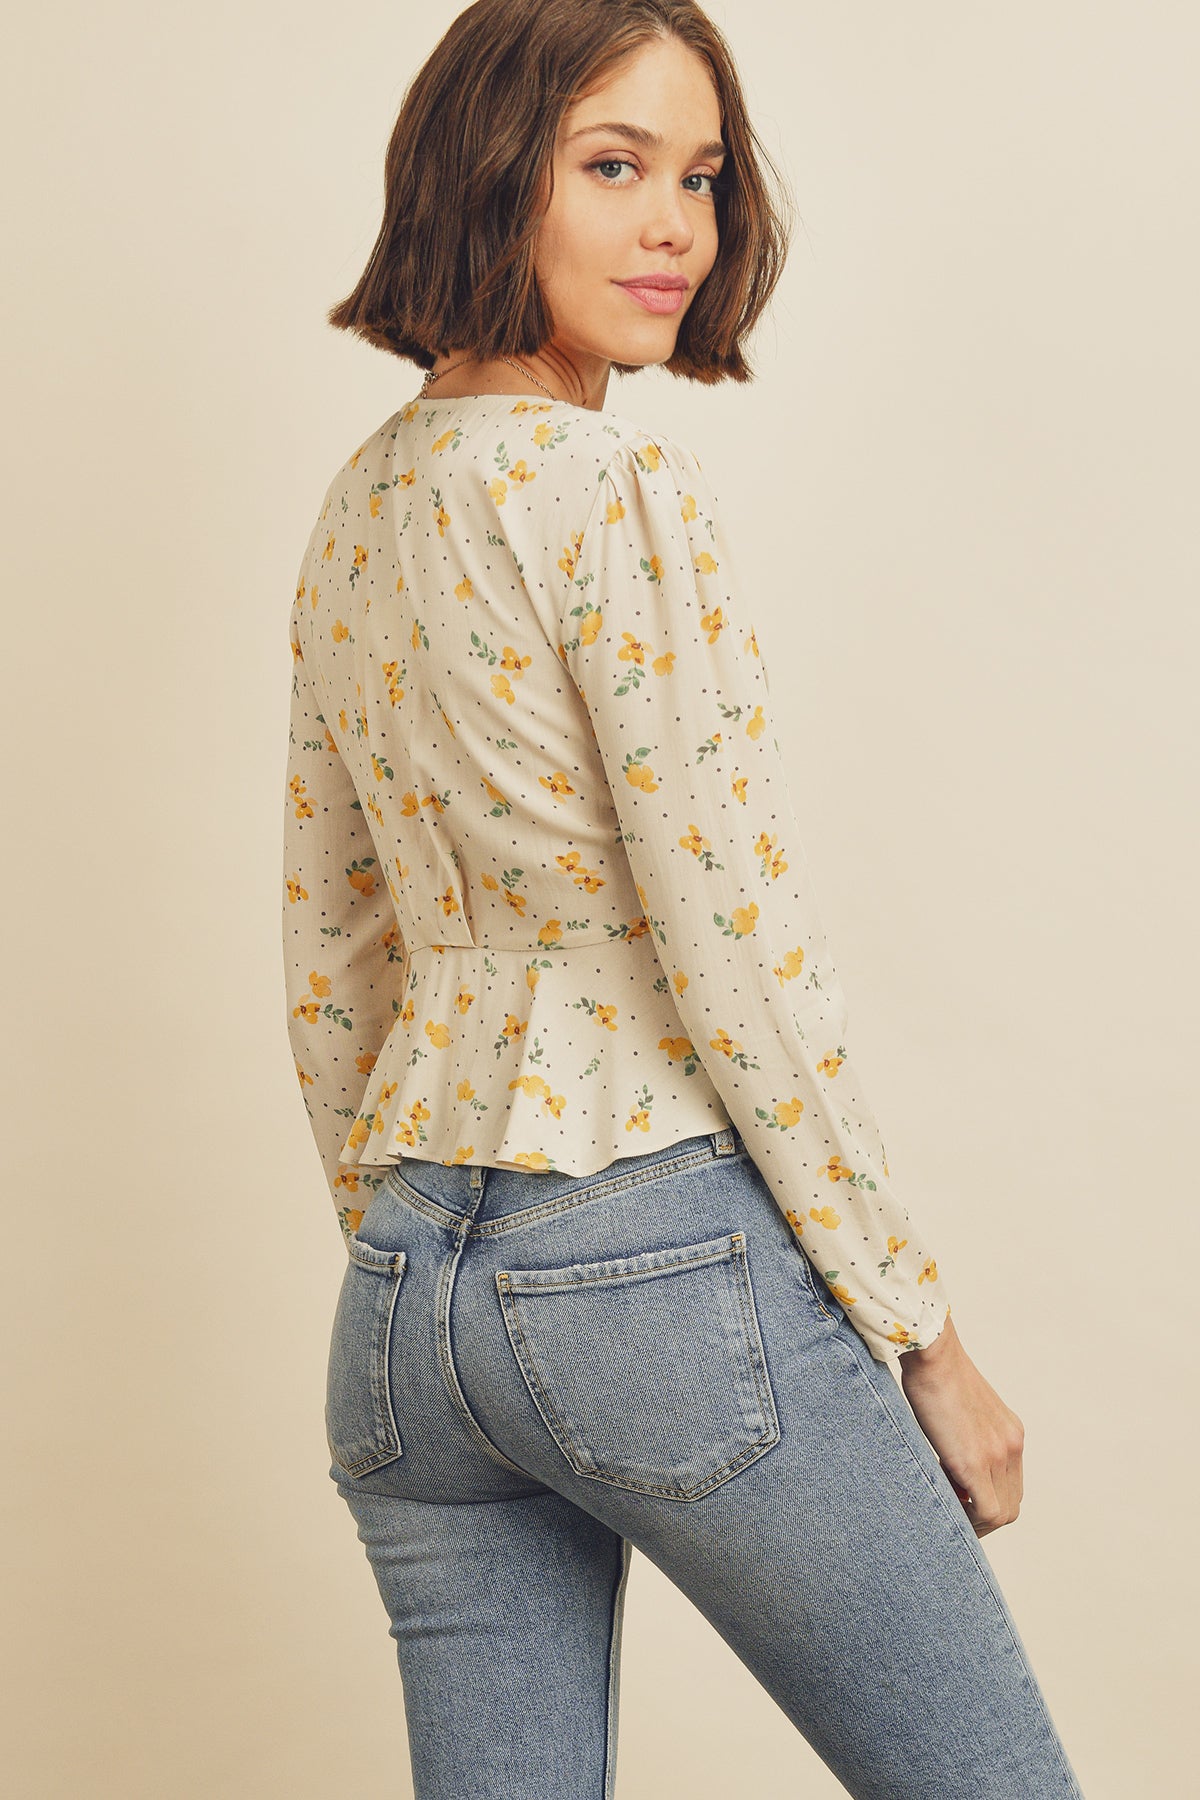 Buttercup Tie-Front Top - Cream/Yellow